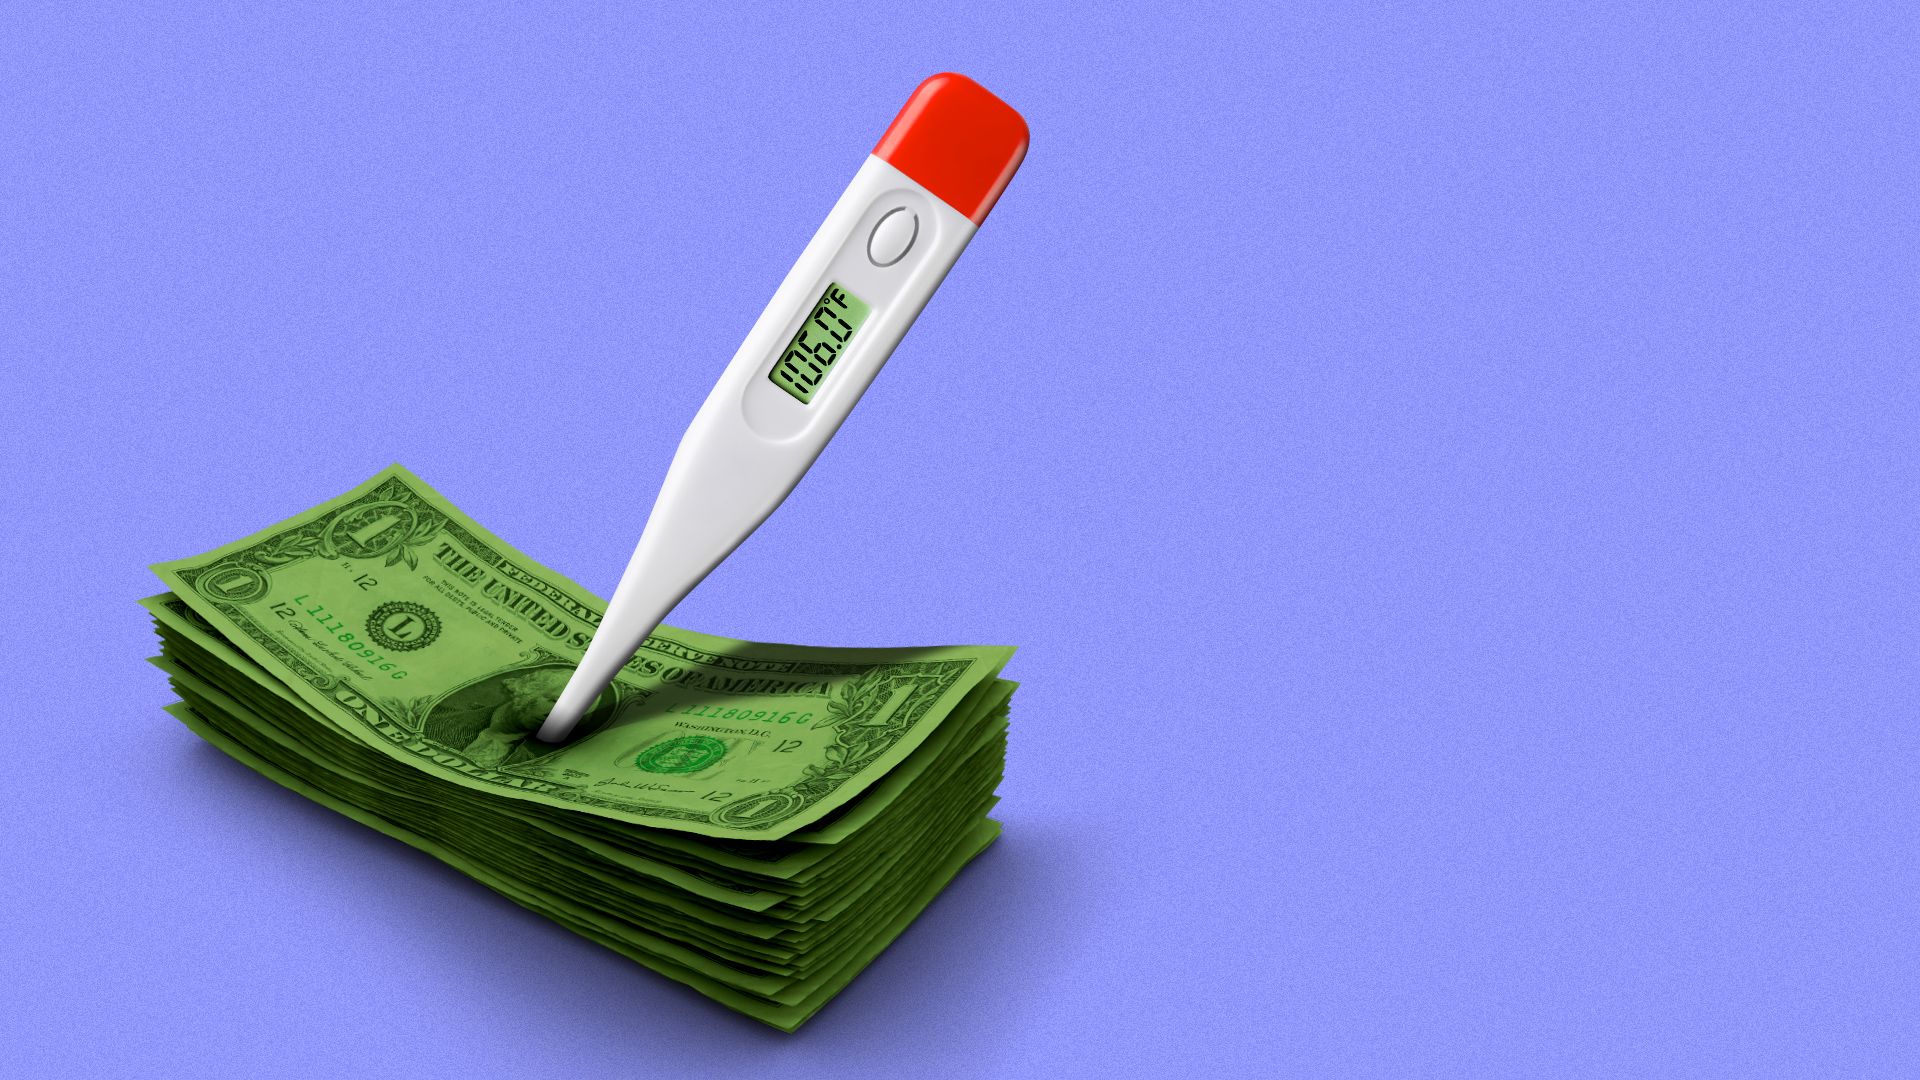 A thermometer takes the temperature of a stack of dollar bills in this illustration.